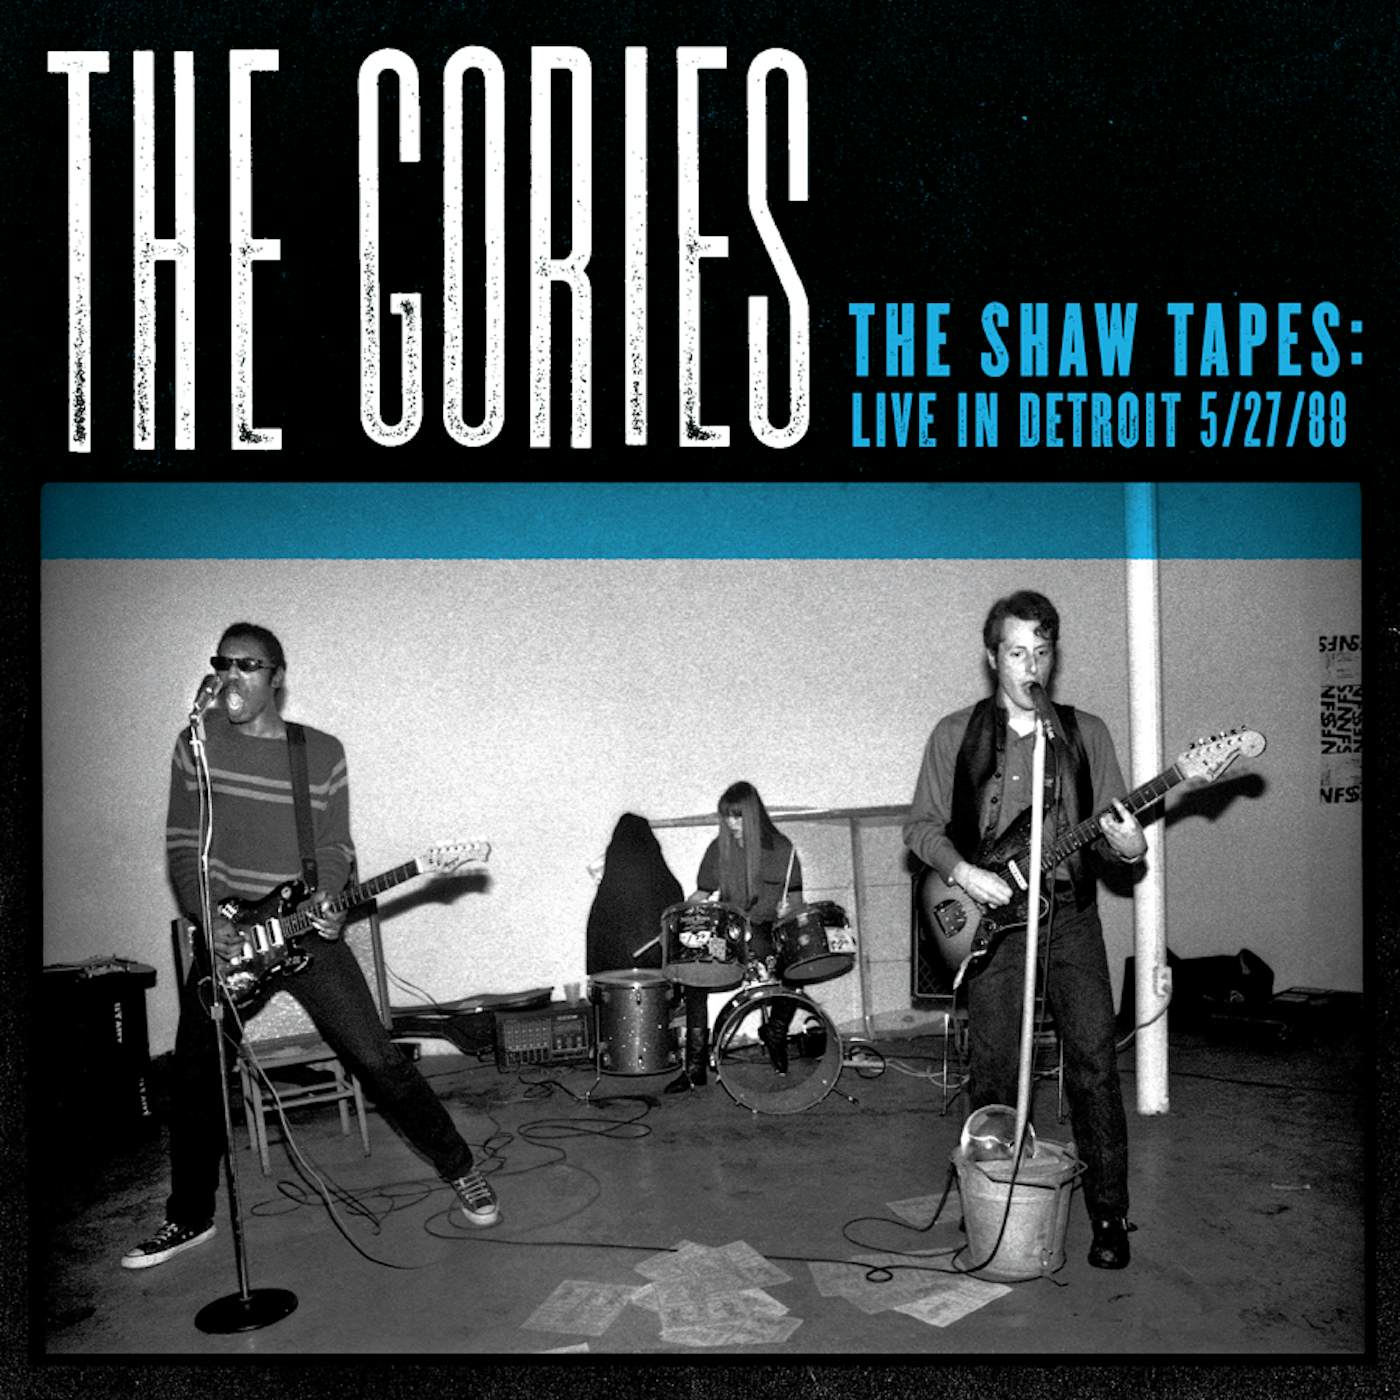 The Gories SHAW TAPES: LIVE IN DETROIT 5/27/88 Vinyl Record